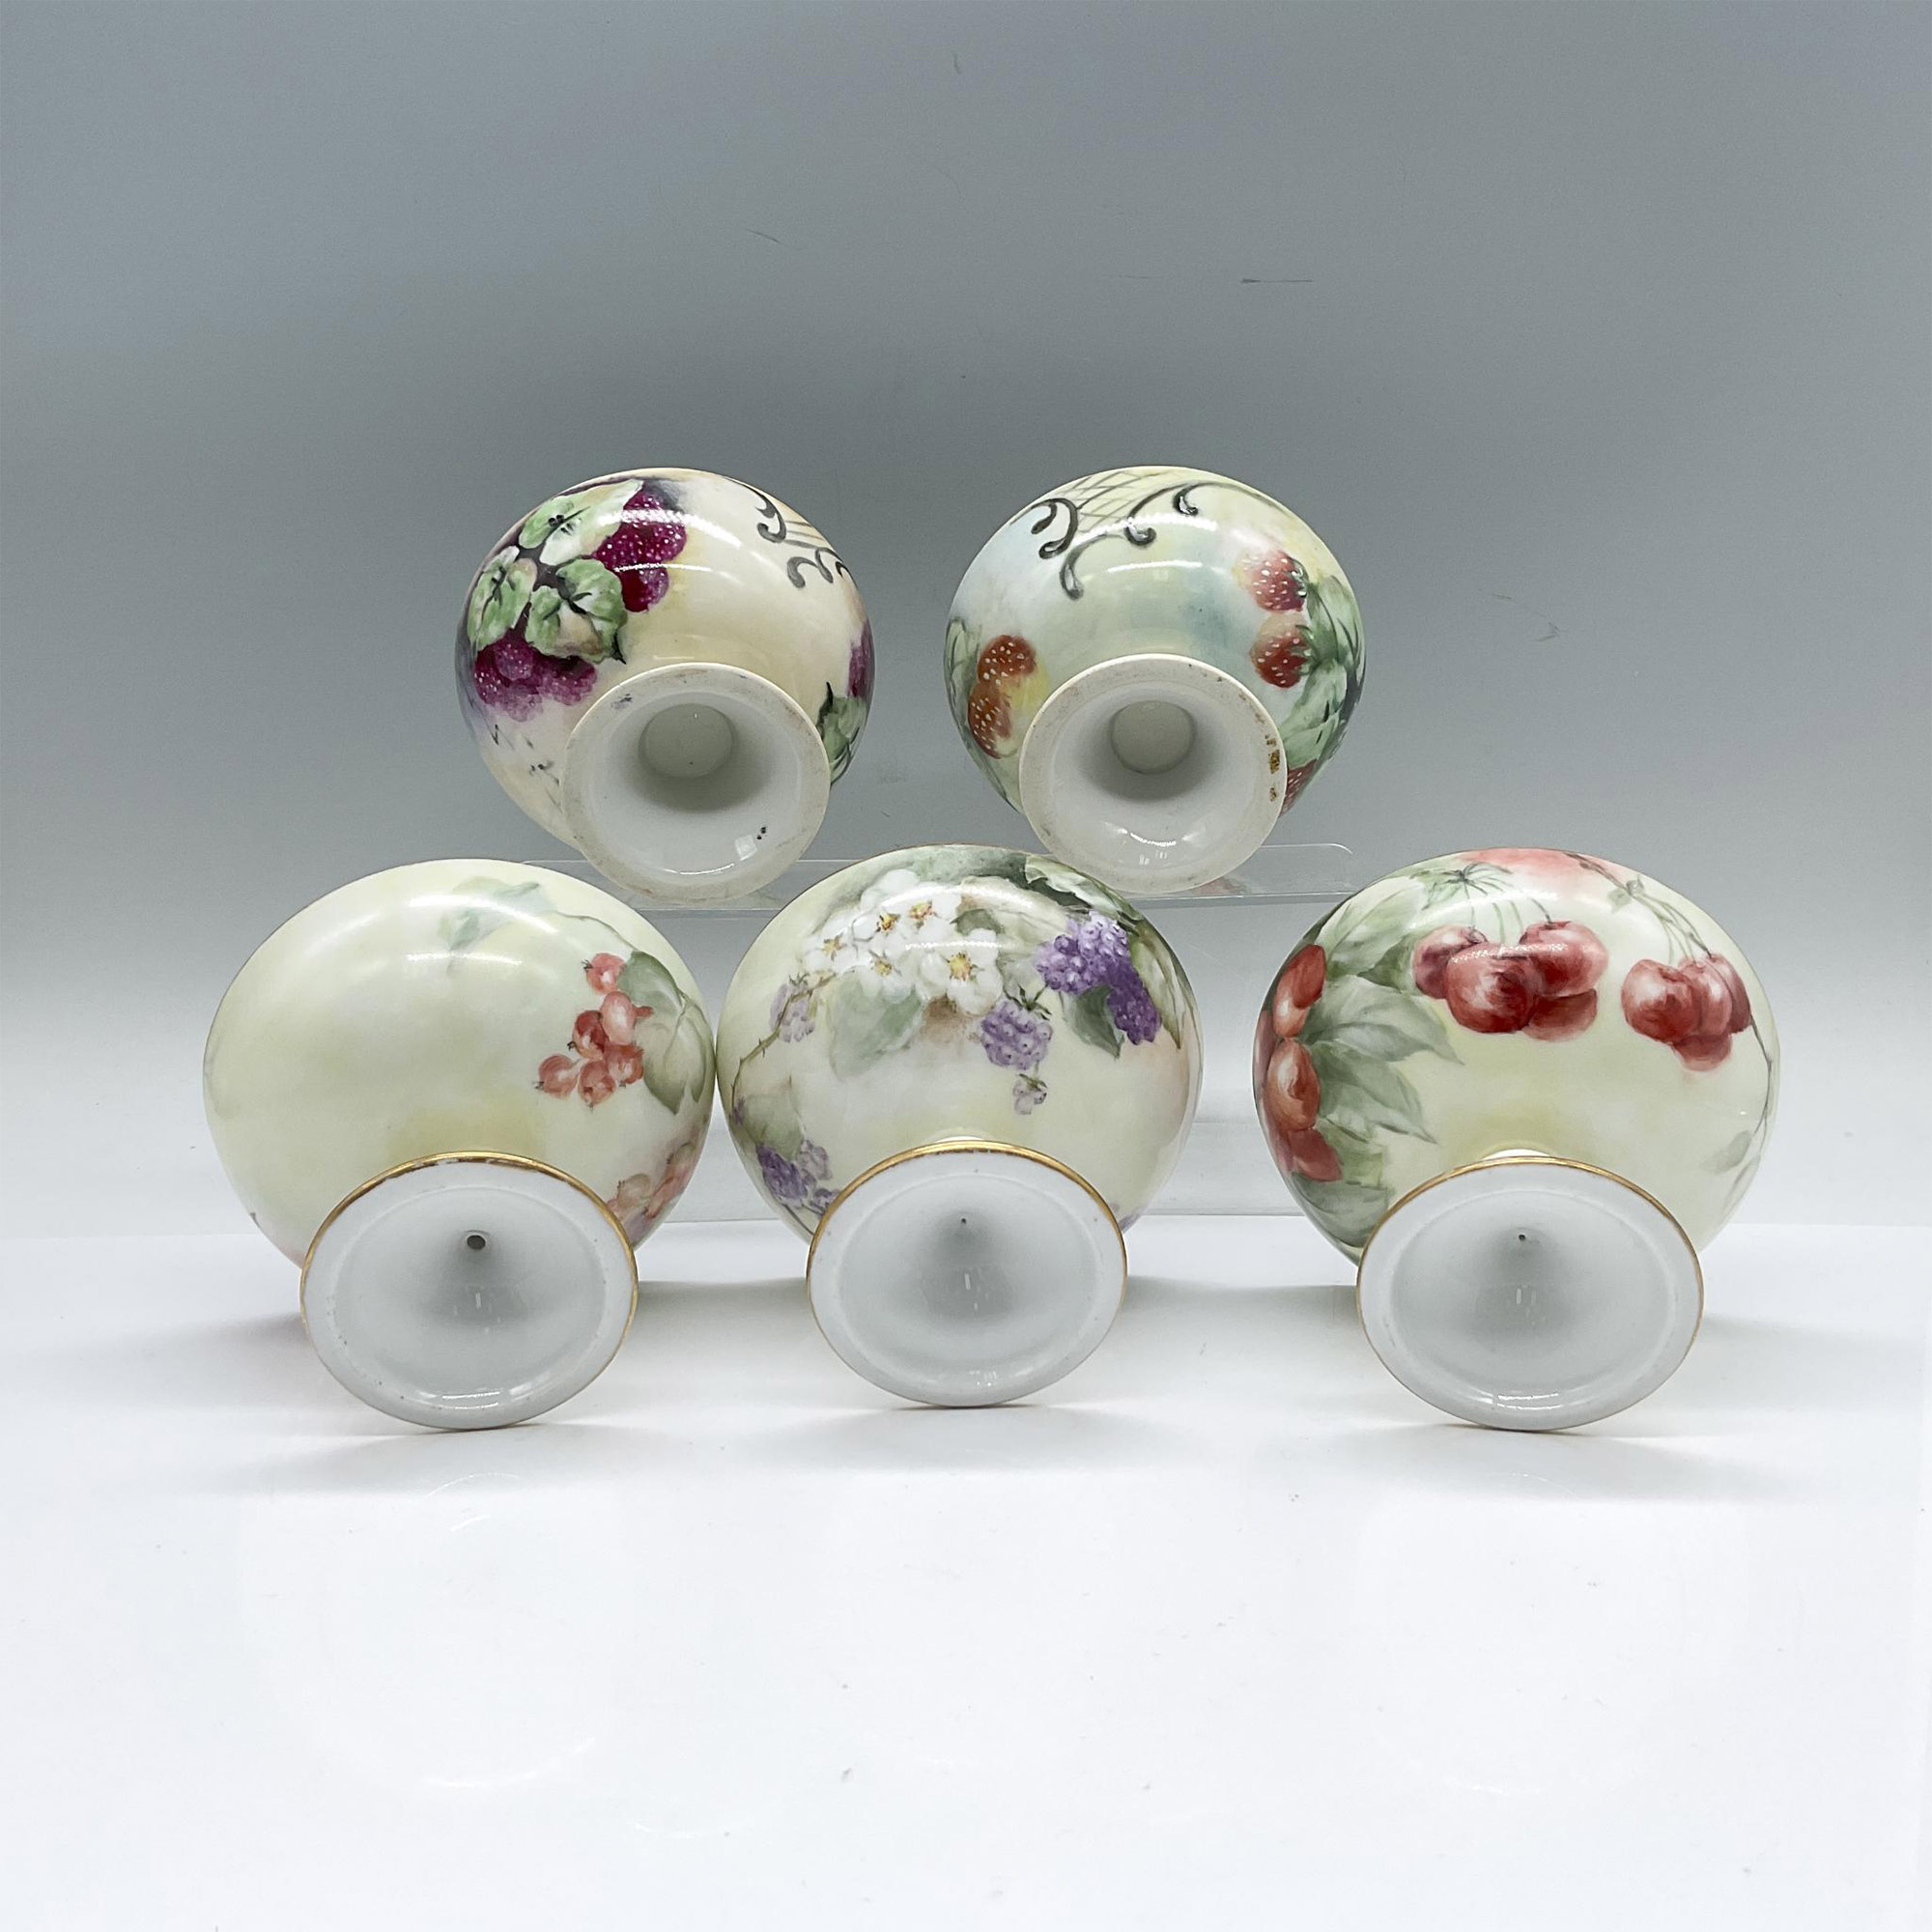 5pc French Style Porcelain Sorbet Footed Bowls - Image 3 of 3